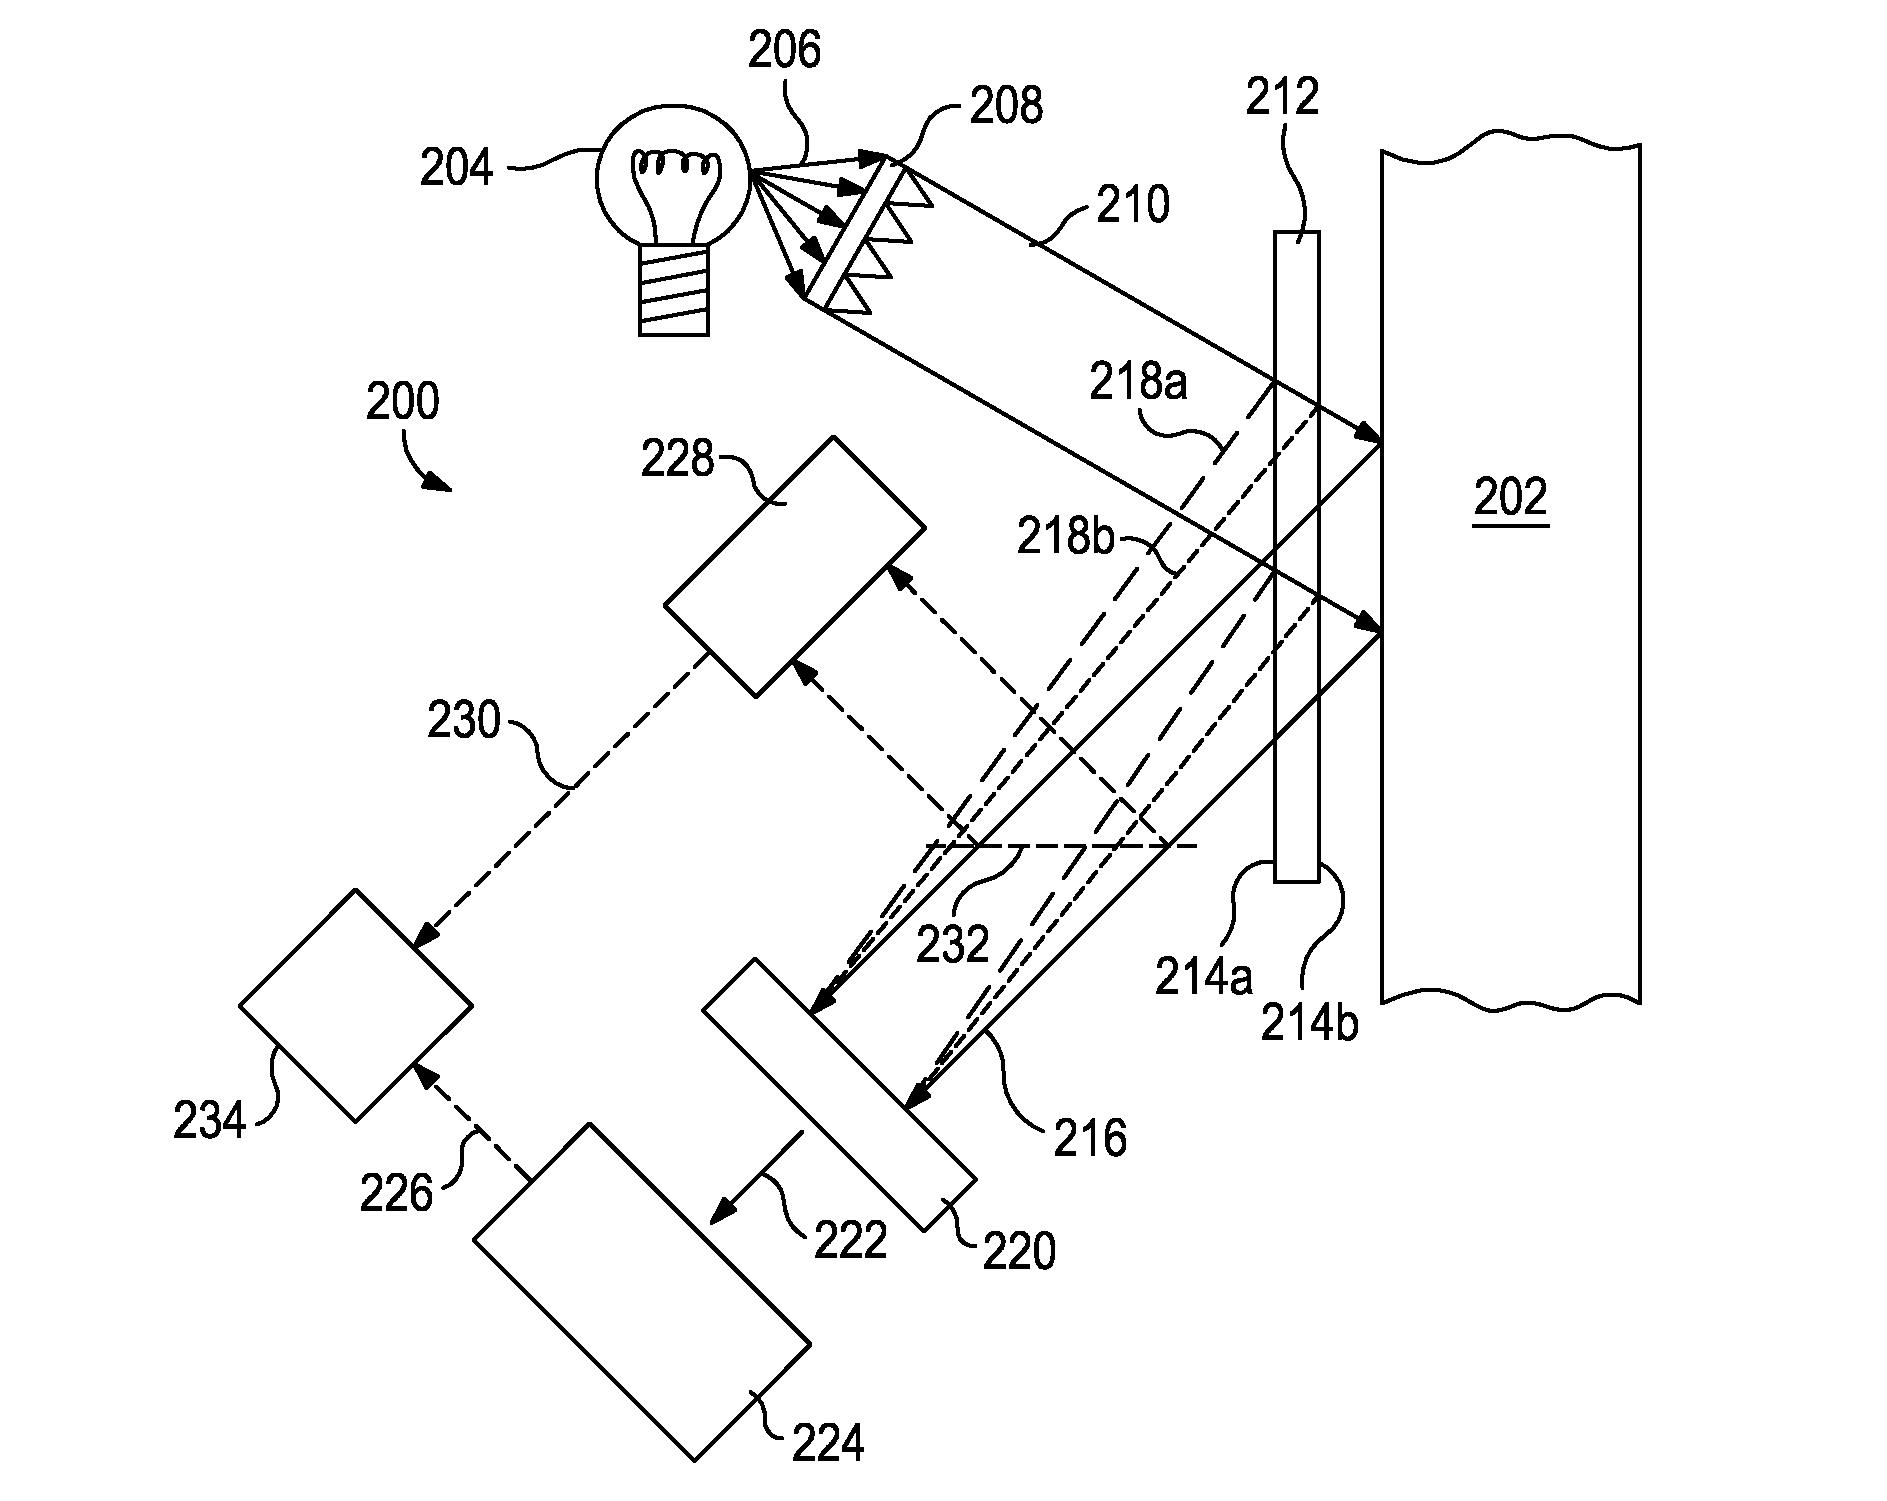 Imaging systems for optical computing devices